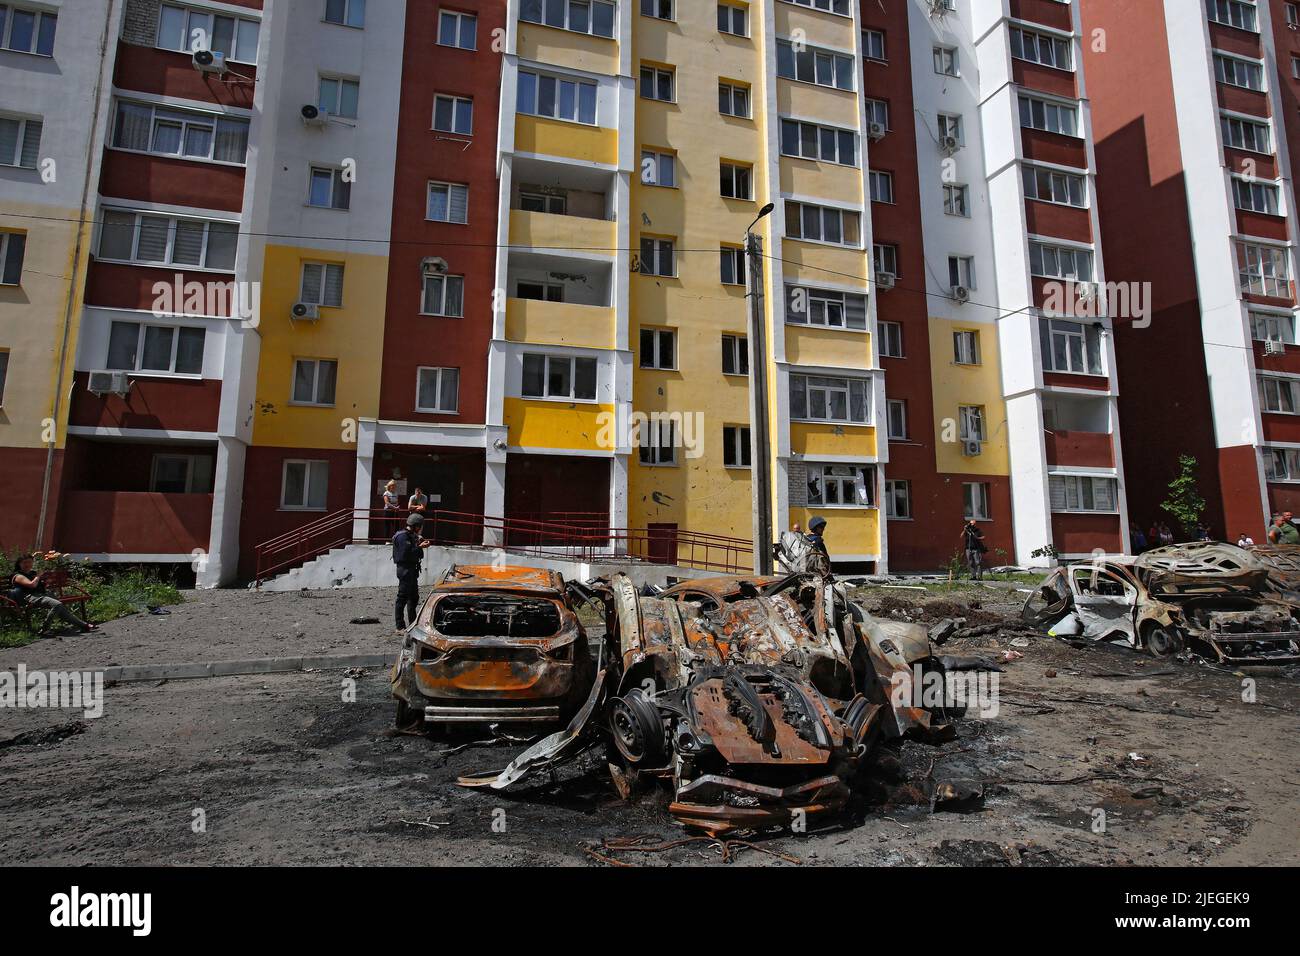 Burnt-out cars are pictured in the yard of an apartment block after the shelling of a northern neighbourhood by Russian troops with a BM-30 Smerch multiple rocket launcher, Kharkiv, northeastern Ukraine, June 26, 2022. Photo by Vyacheslav Madiyevskyy/Ukrinform/ABACAPRESS.COM Stock Photo